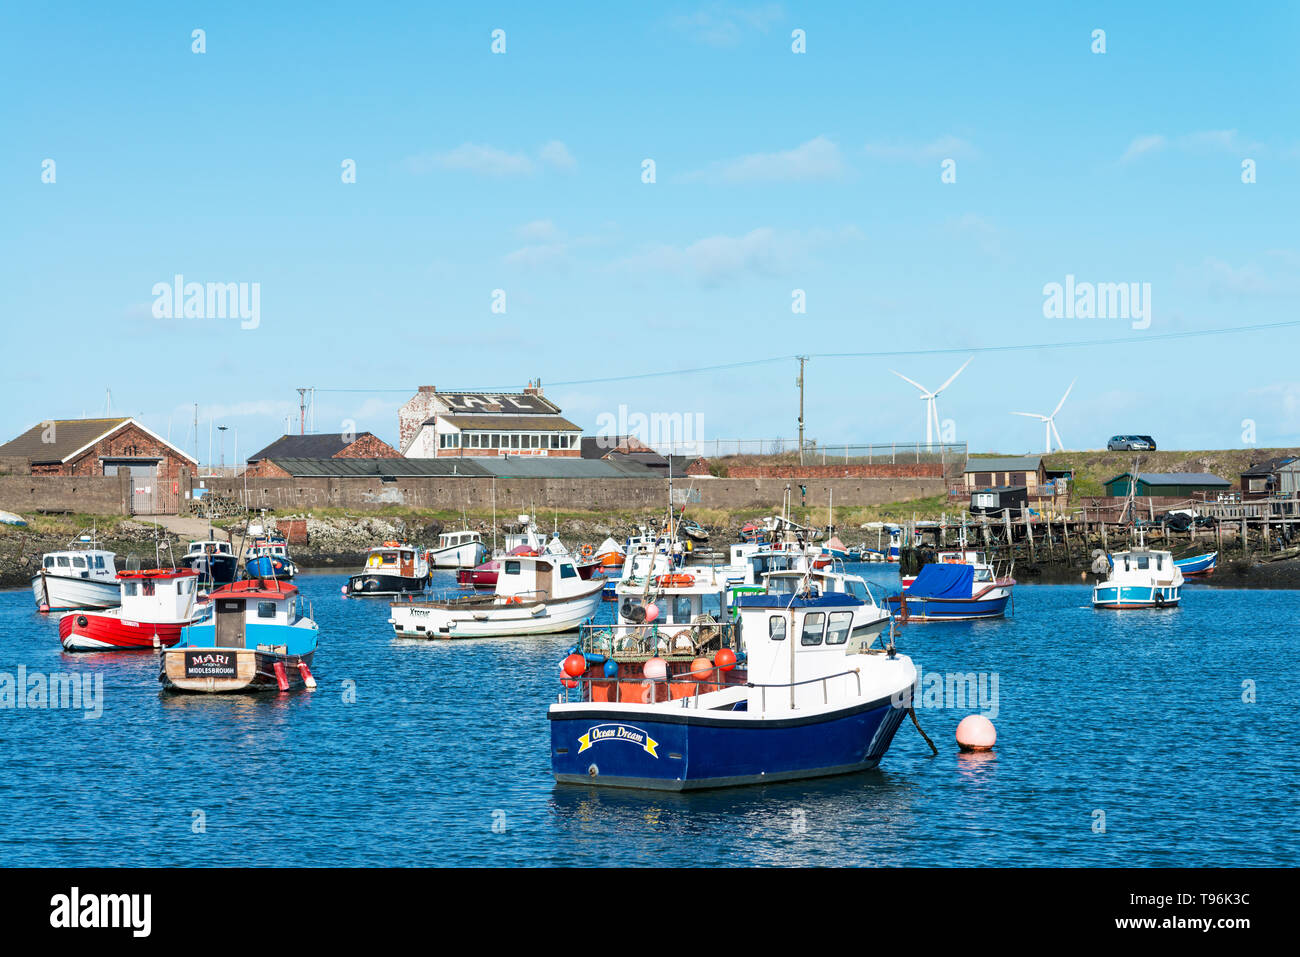 Fishing boats moored at South Gare, Redcar, Cleveland, Teesside, UK Stock Photo